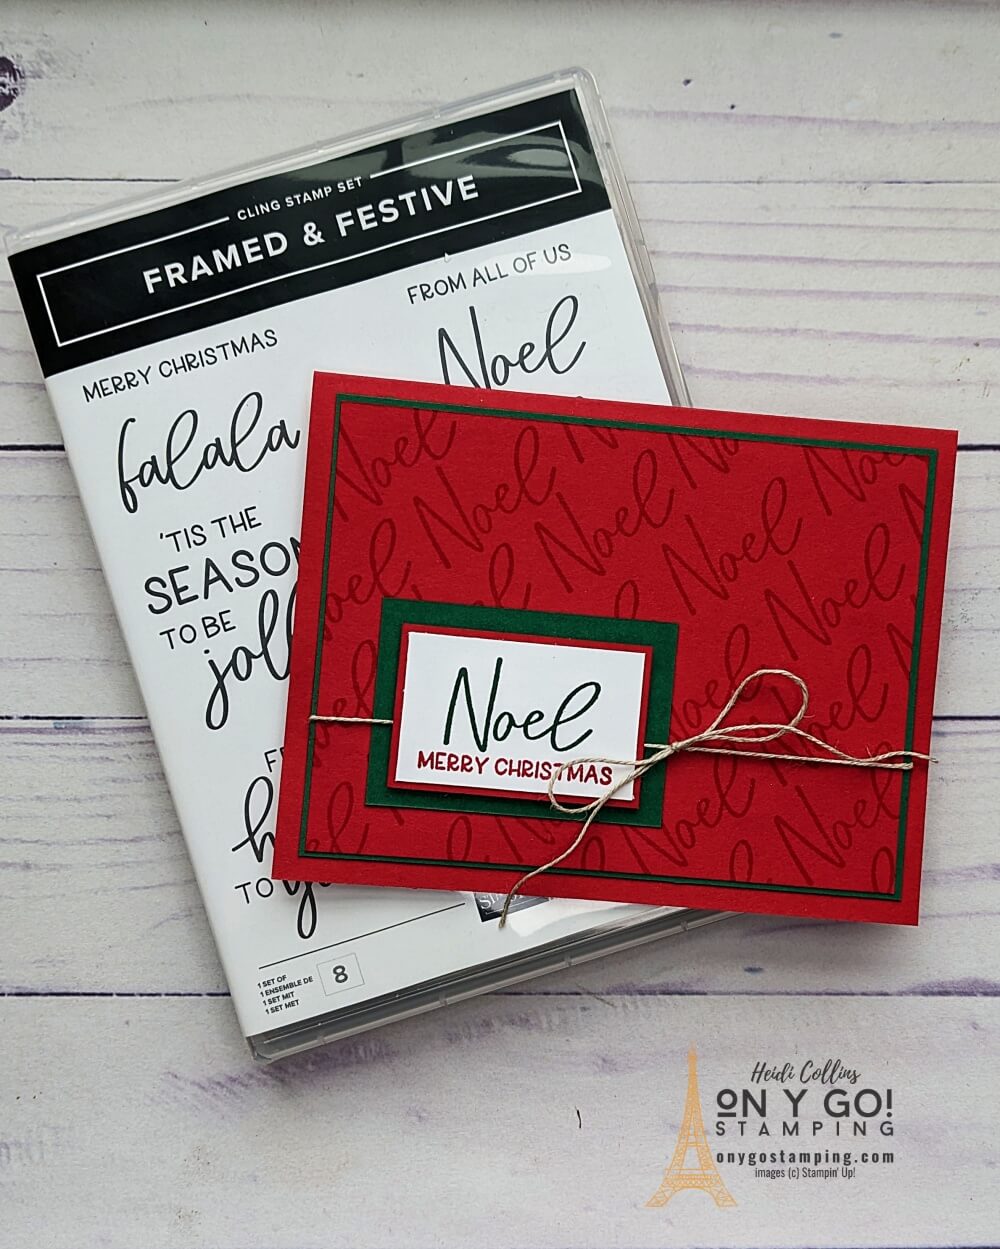 Looking for an easy handmade holiday card to make this year? The Framed and Festive stamp set from Stampin' Up!® is perfect for quick and easy Christmas cards!